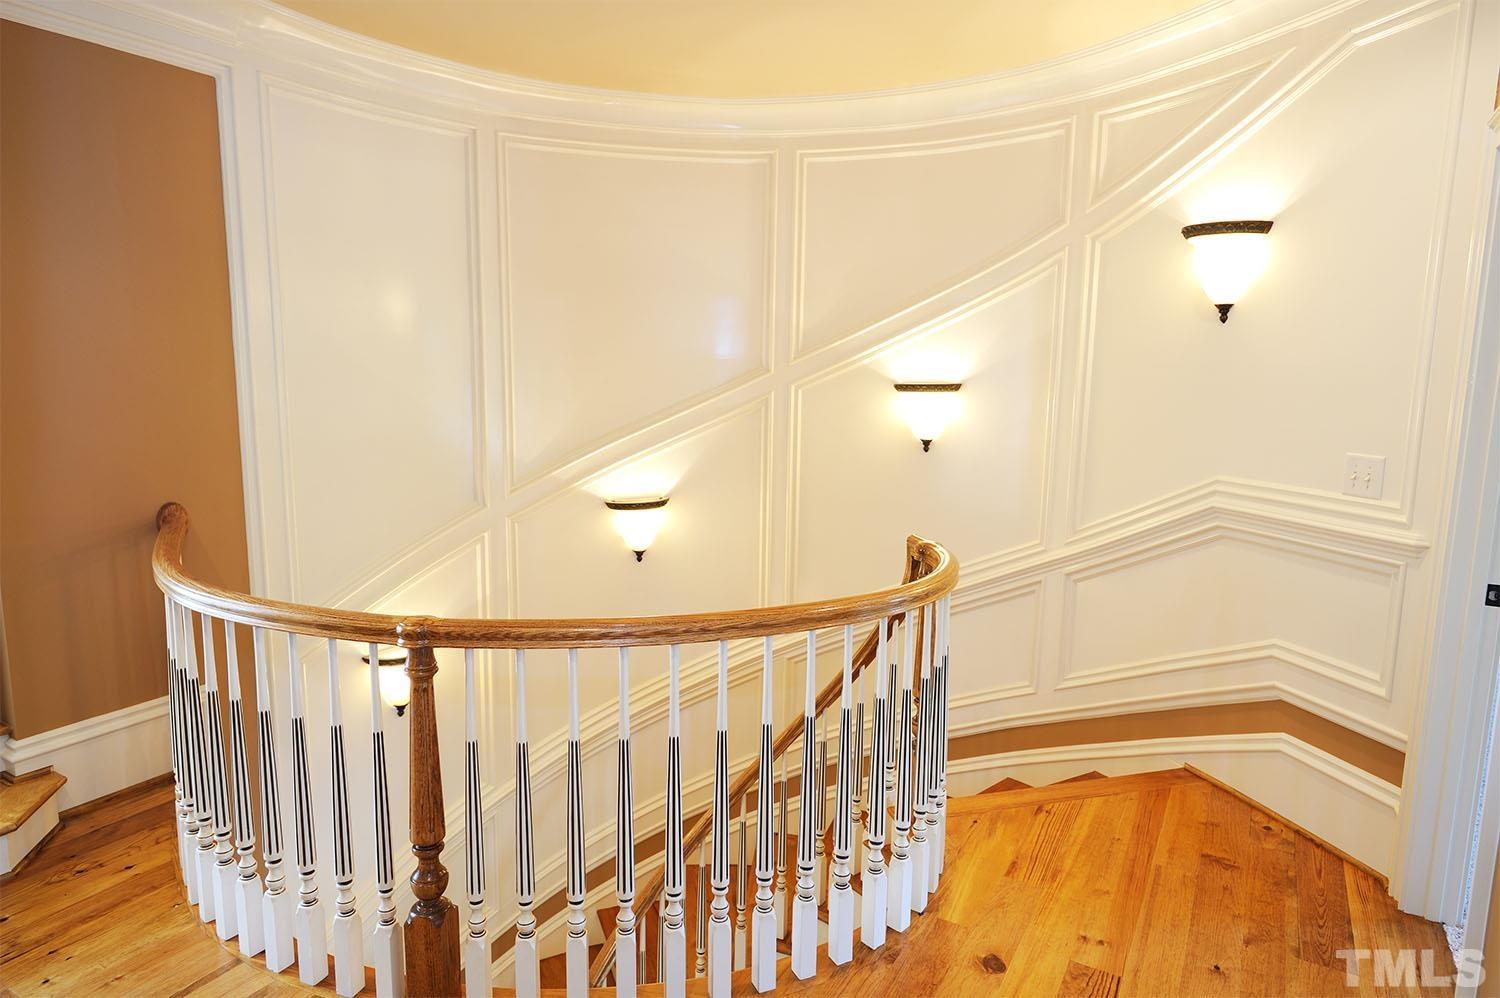 Custom-built curved staircase with hardwoods and gorgeous wall of elegant moldings all the way up the wall. Hardwoods on 2nd floor hallway.